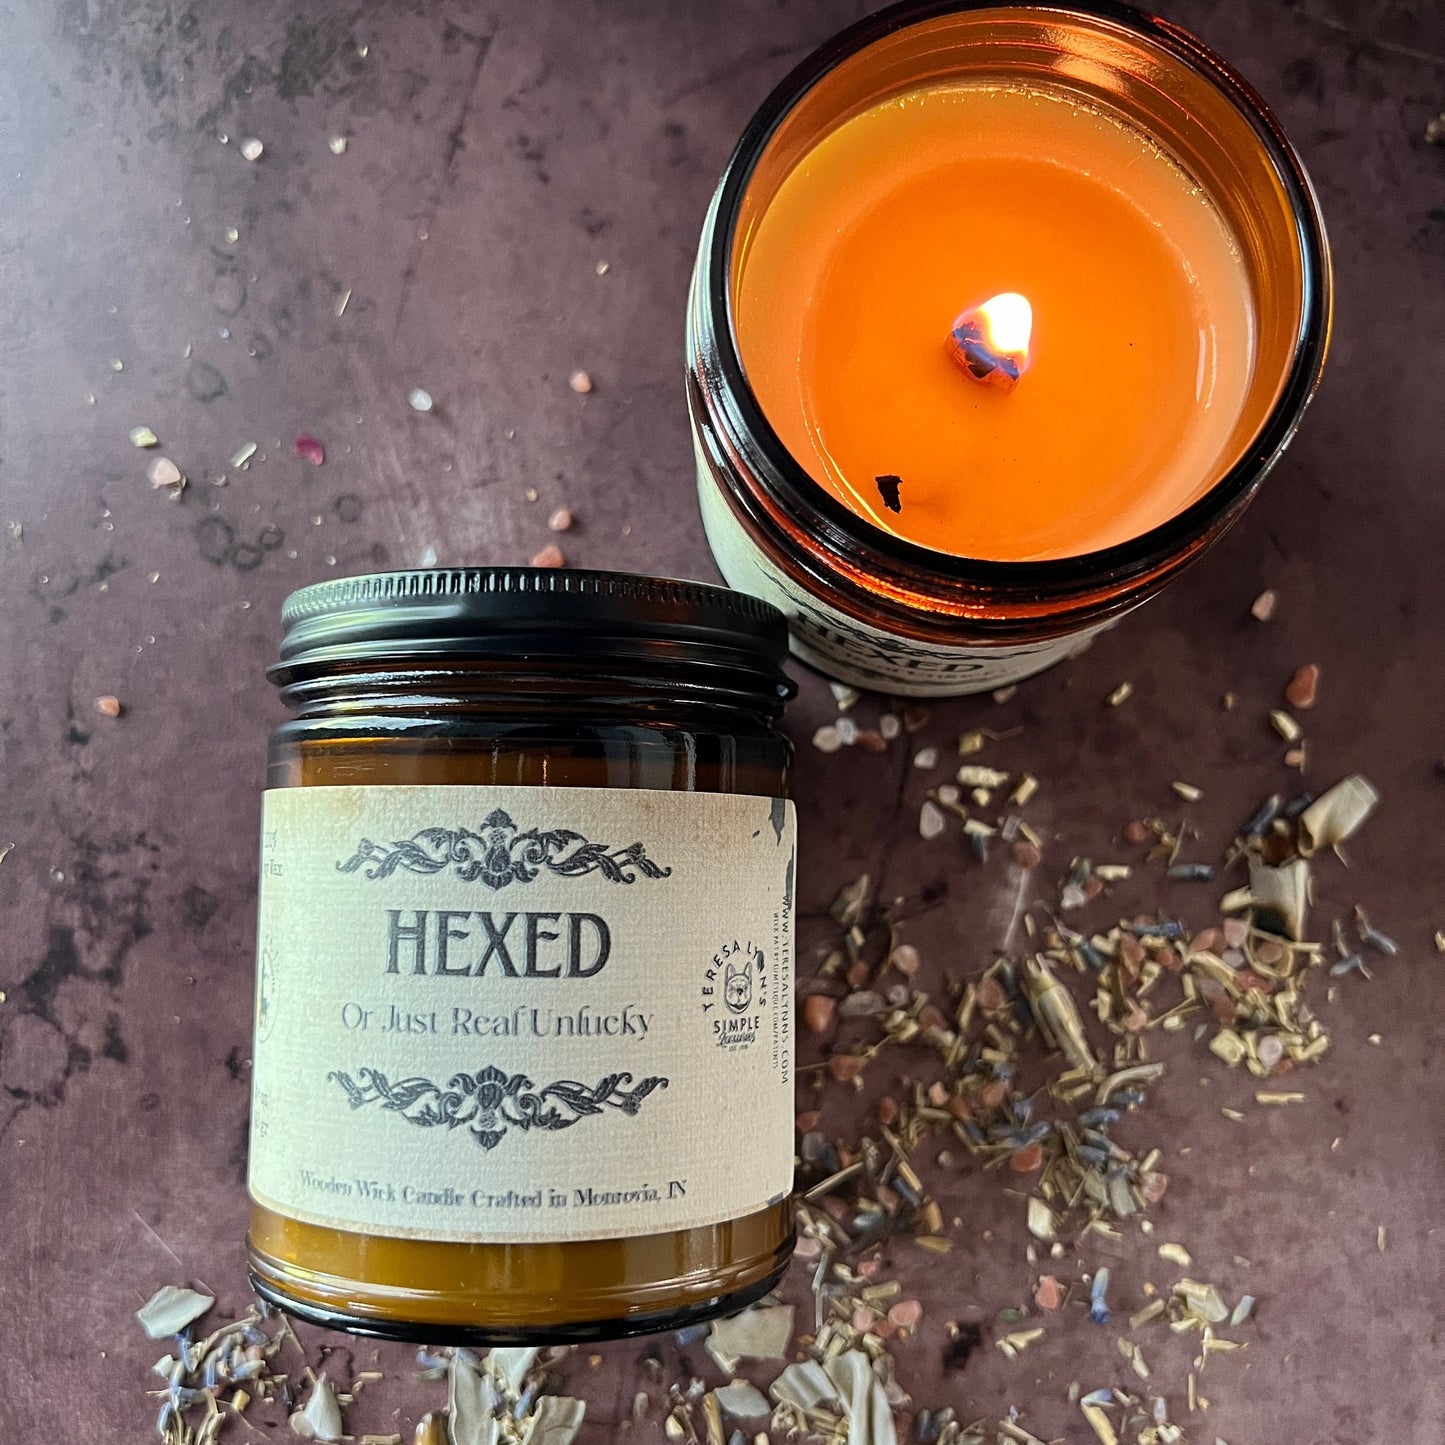 Hexed Or Just Real Unlucky, wooden wick soy wax candle